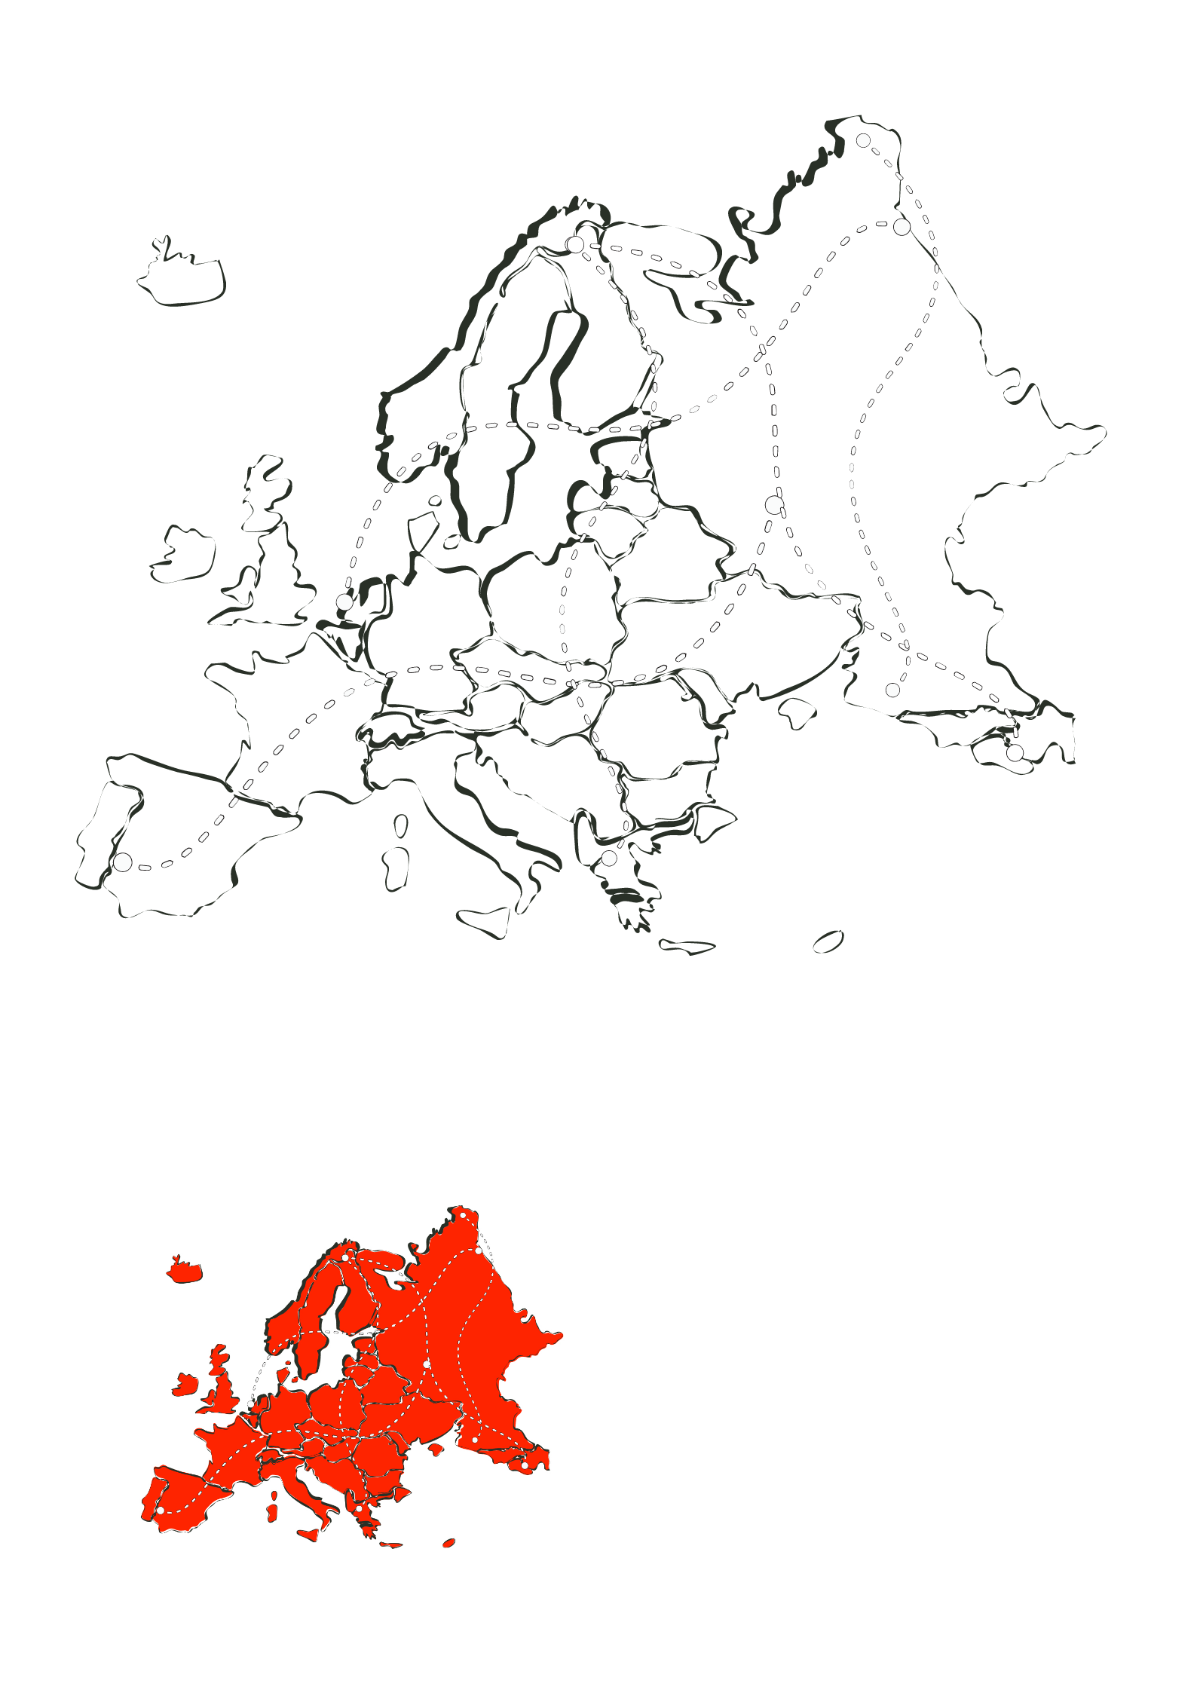 Europe Road Map Coloring Page Template